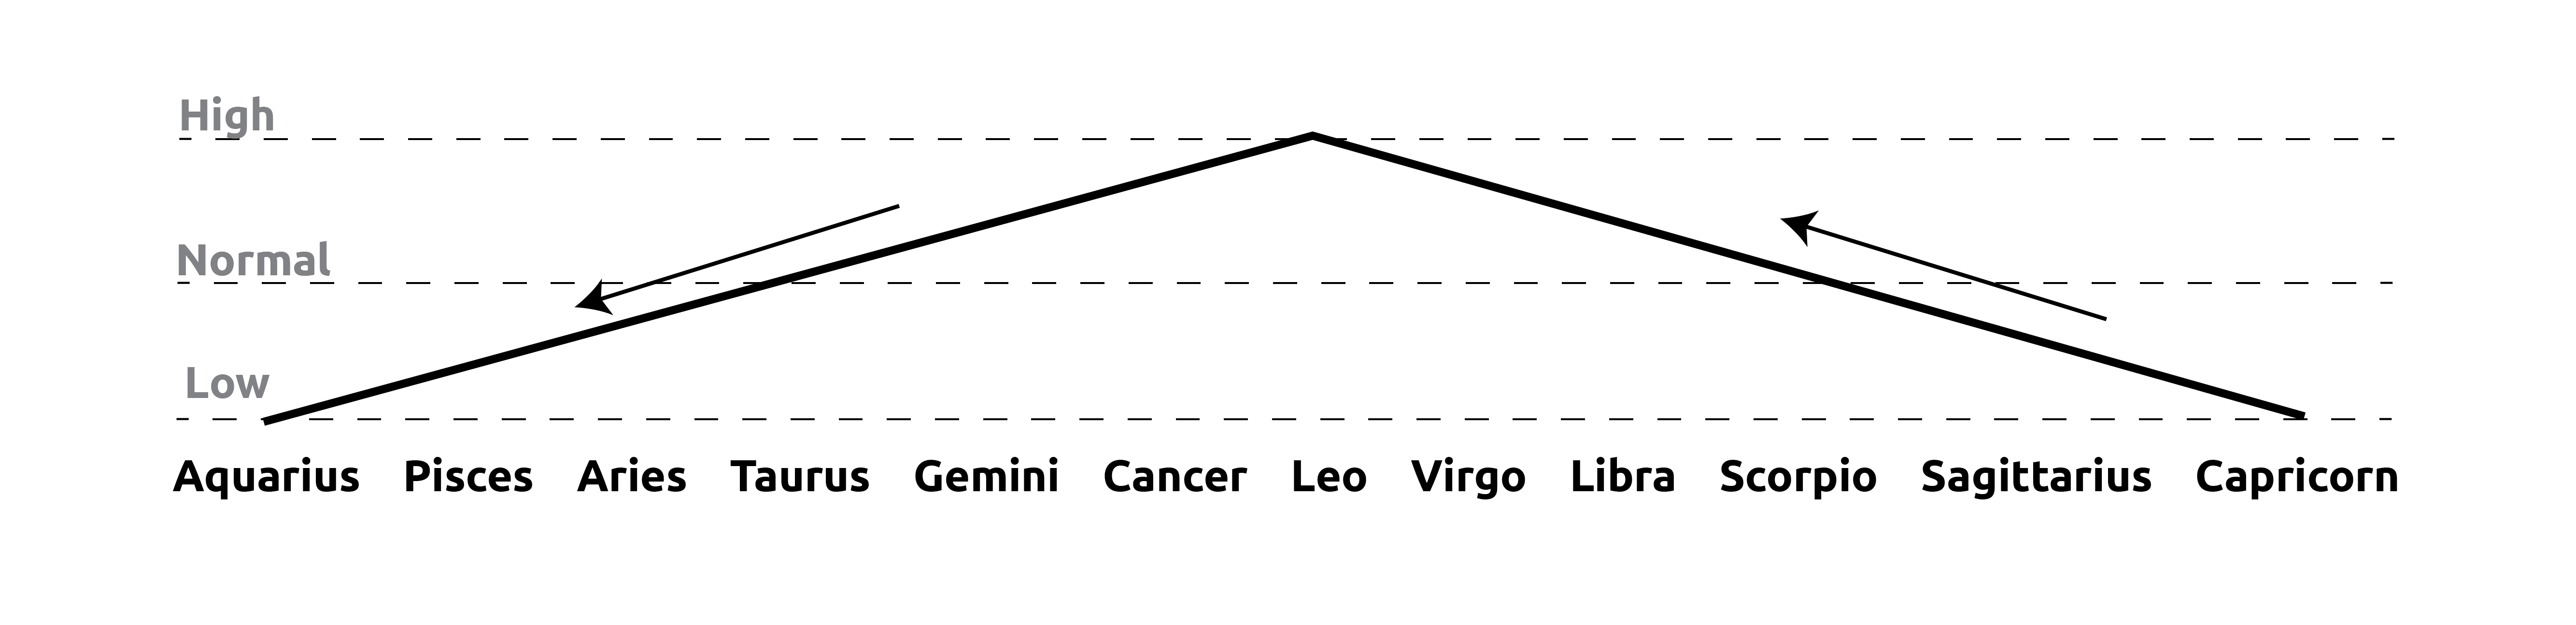 18-year-cycle-constellations